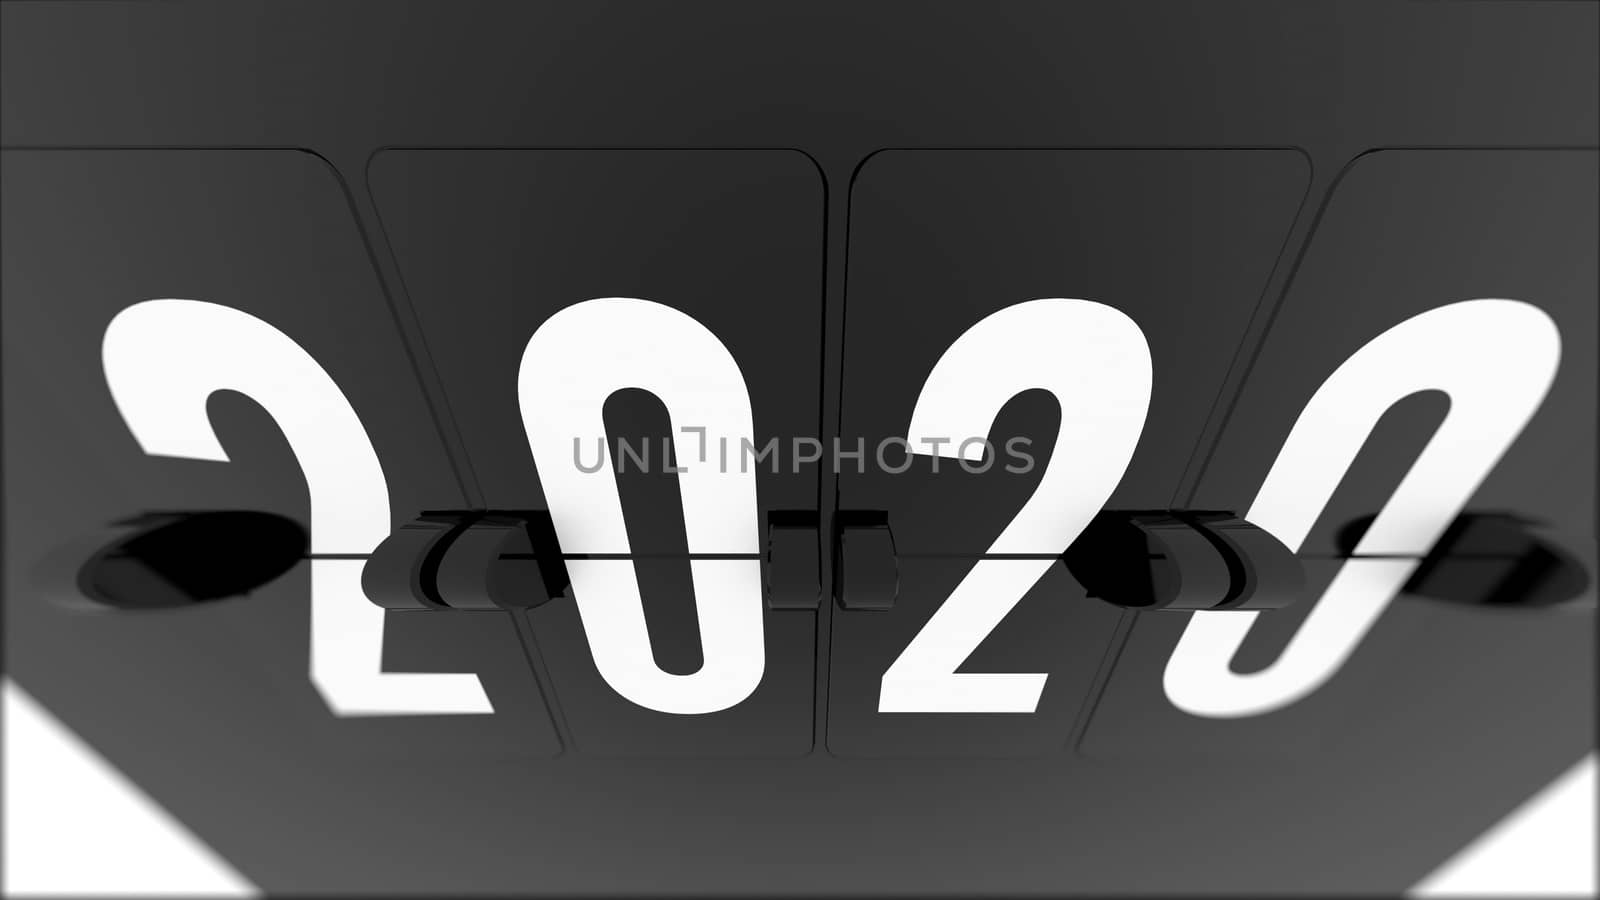 Artistic up down 3d illustration of a black timeflip chart with numbers 2020 put aslant in the white background. It looks classy and cutting edge.